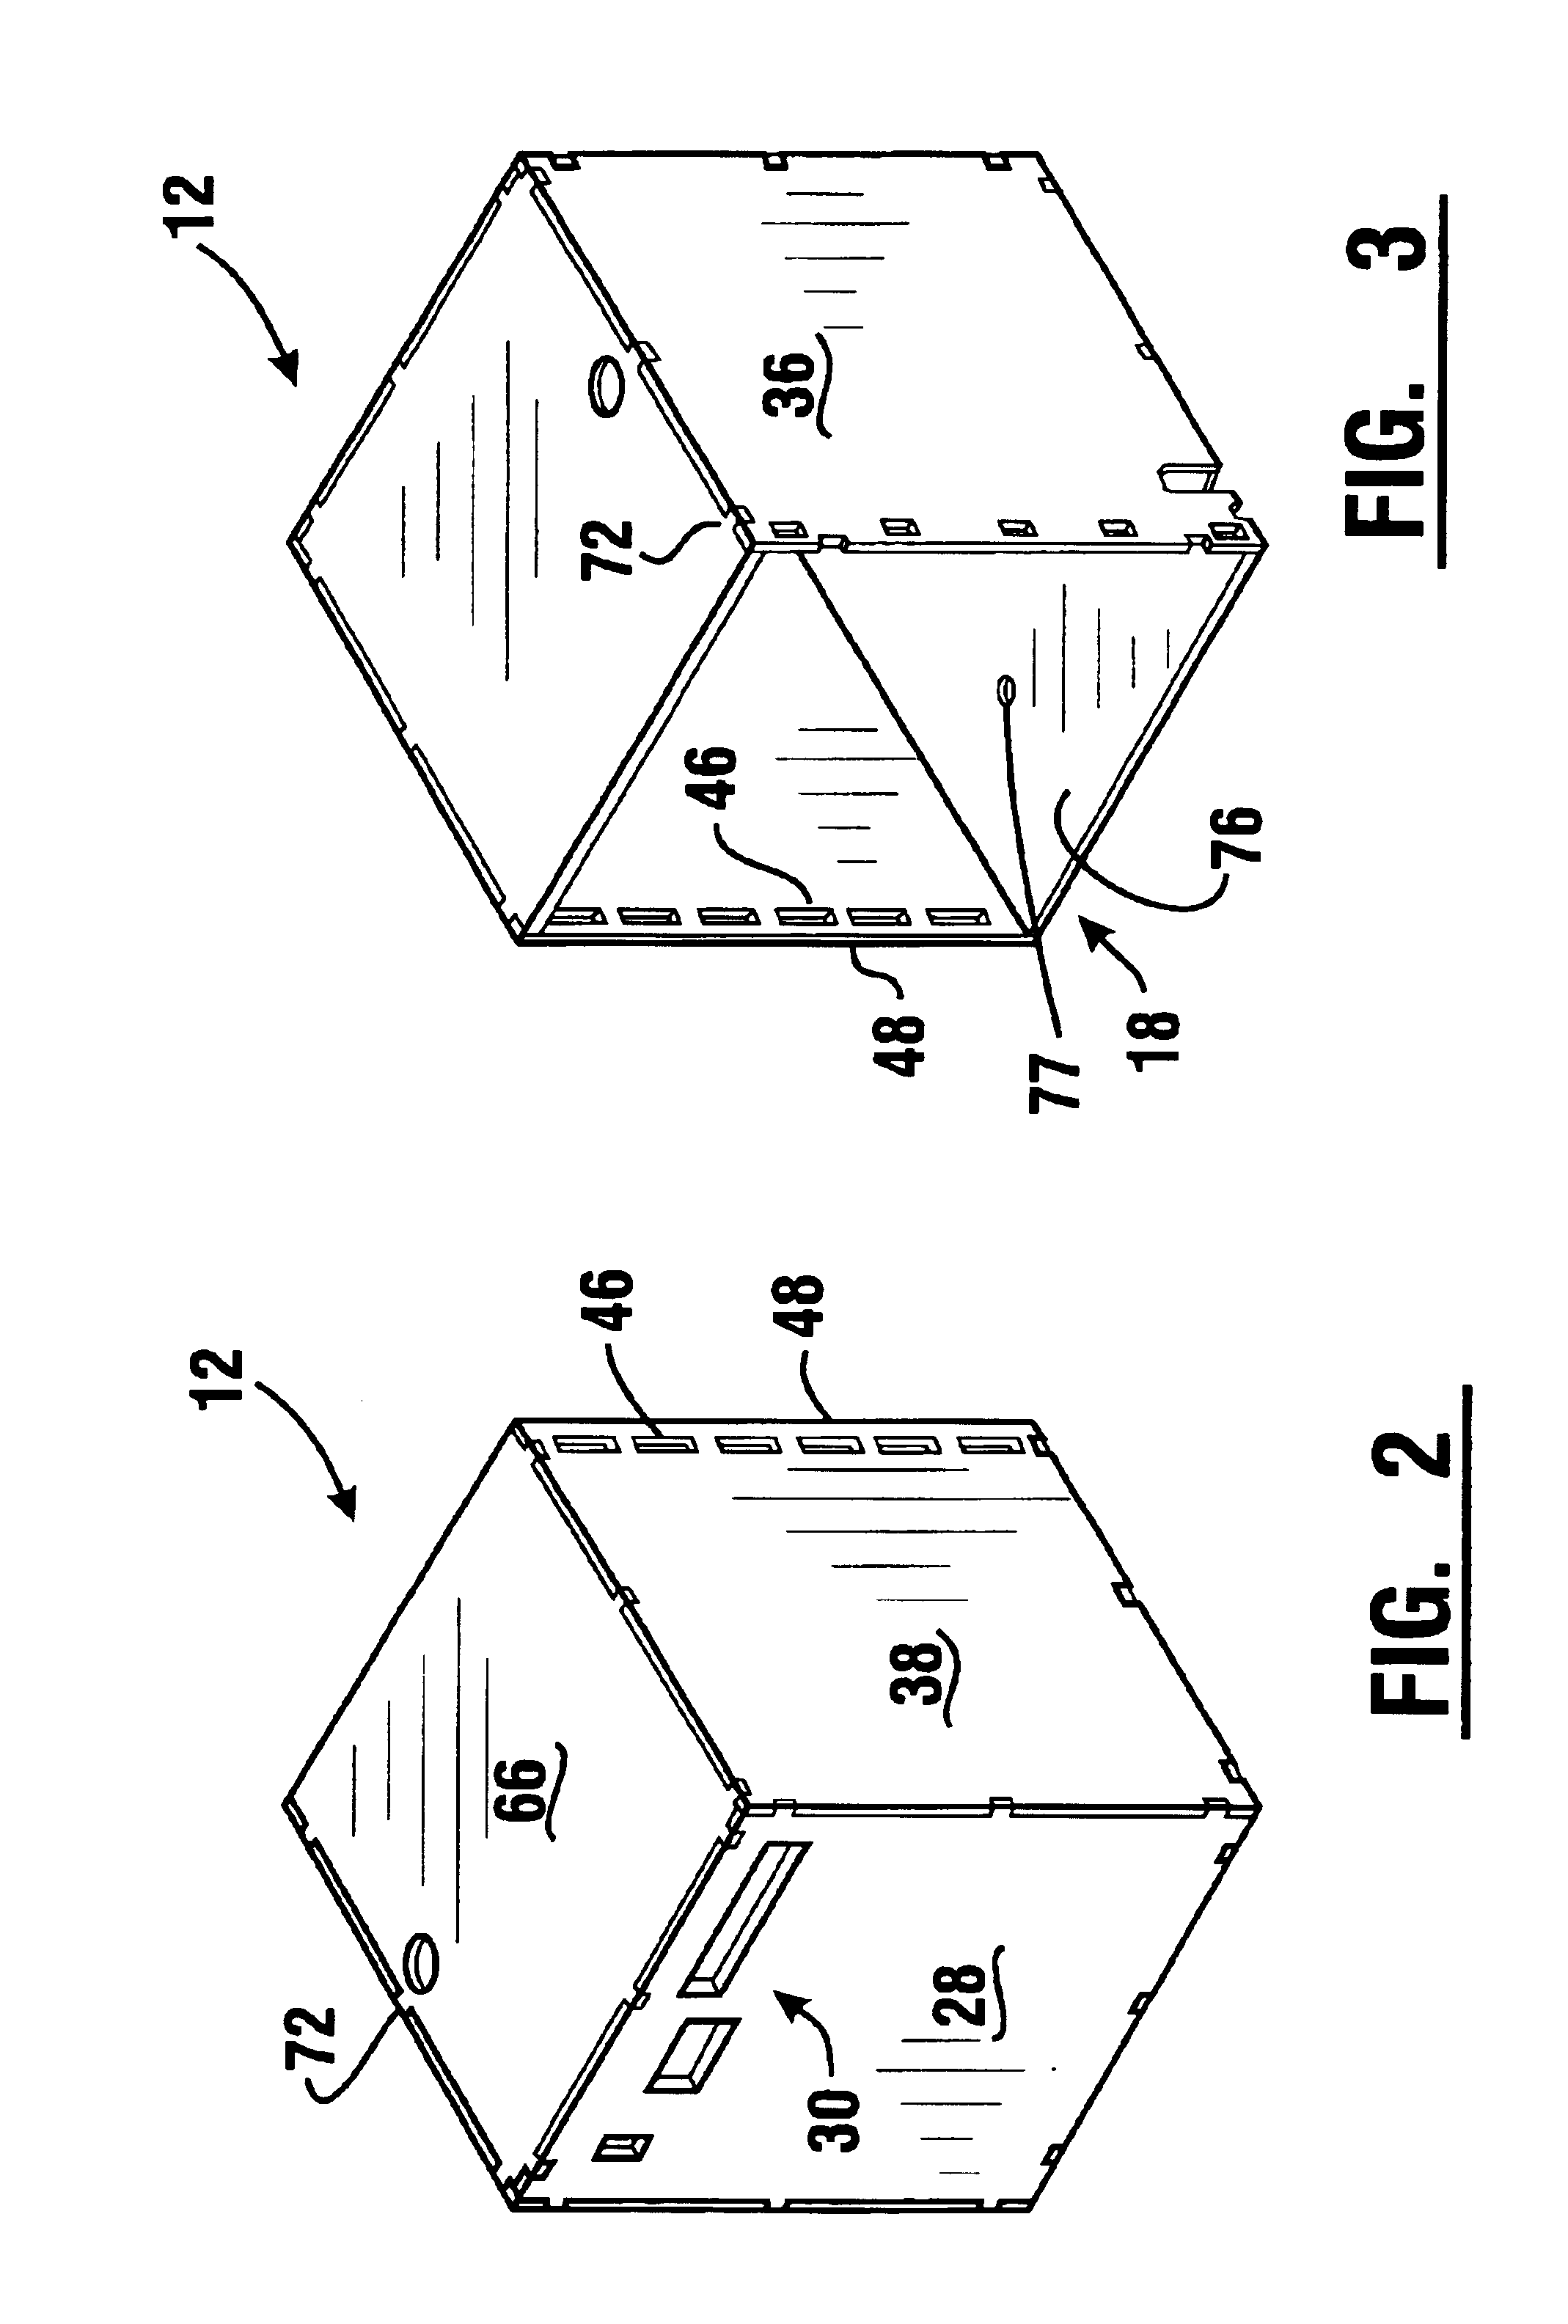 Locking bolt work apparatus for automated banking machine